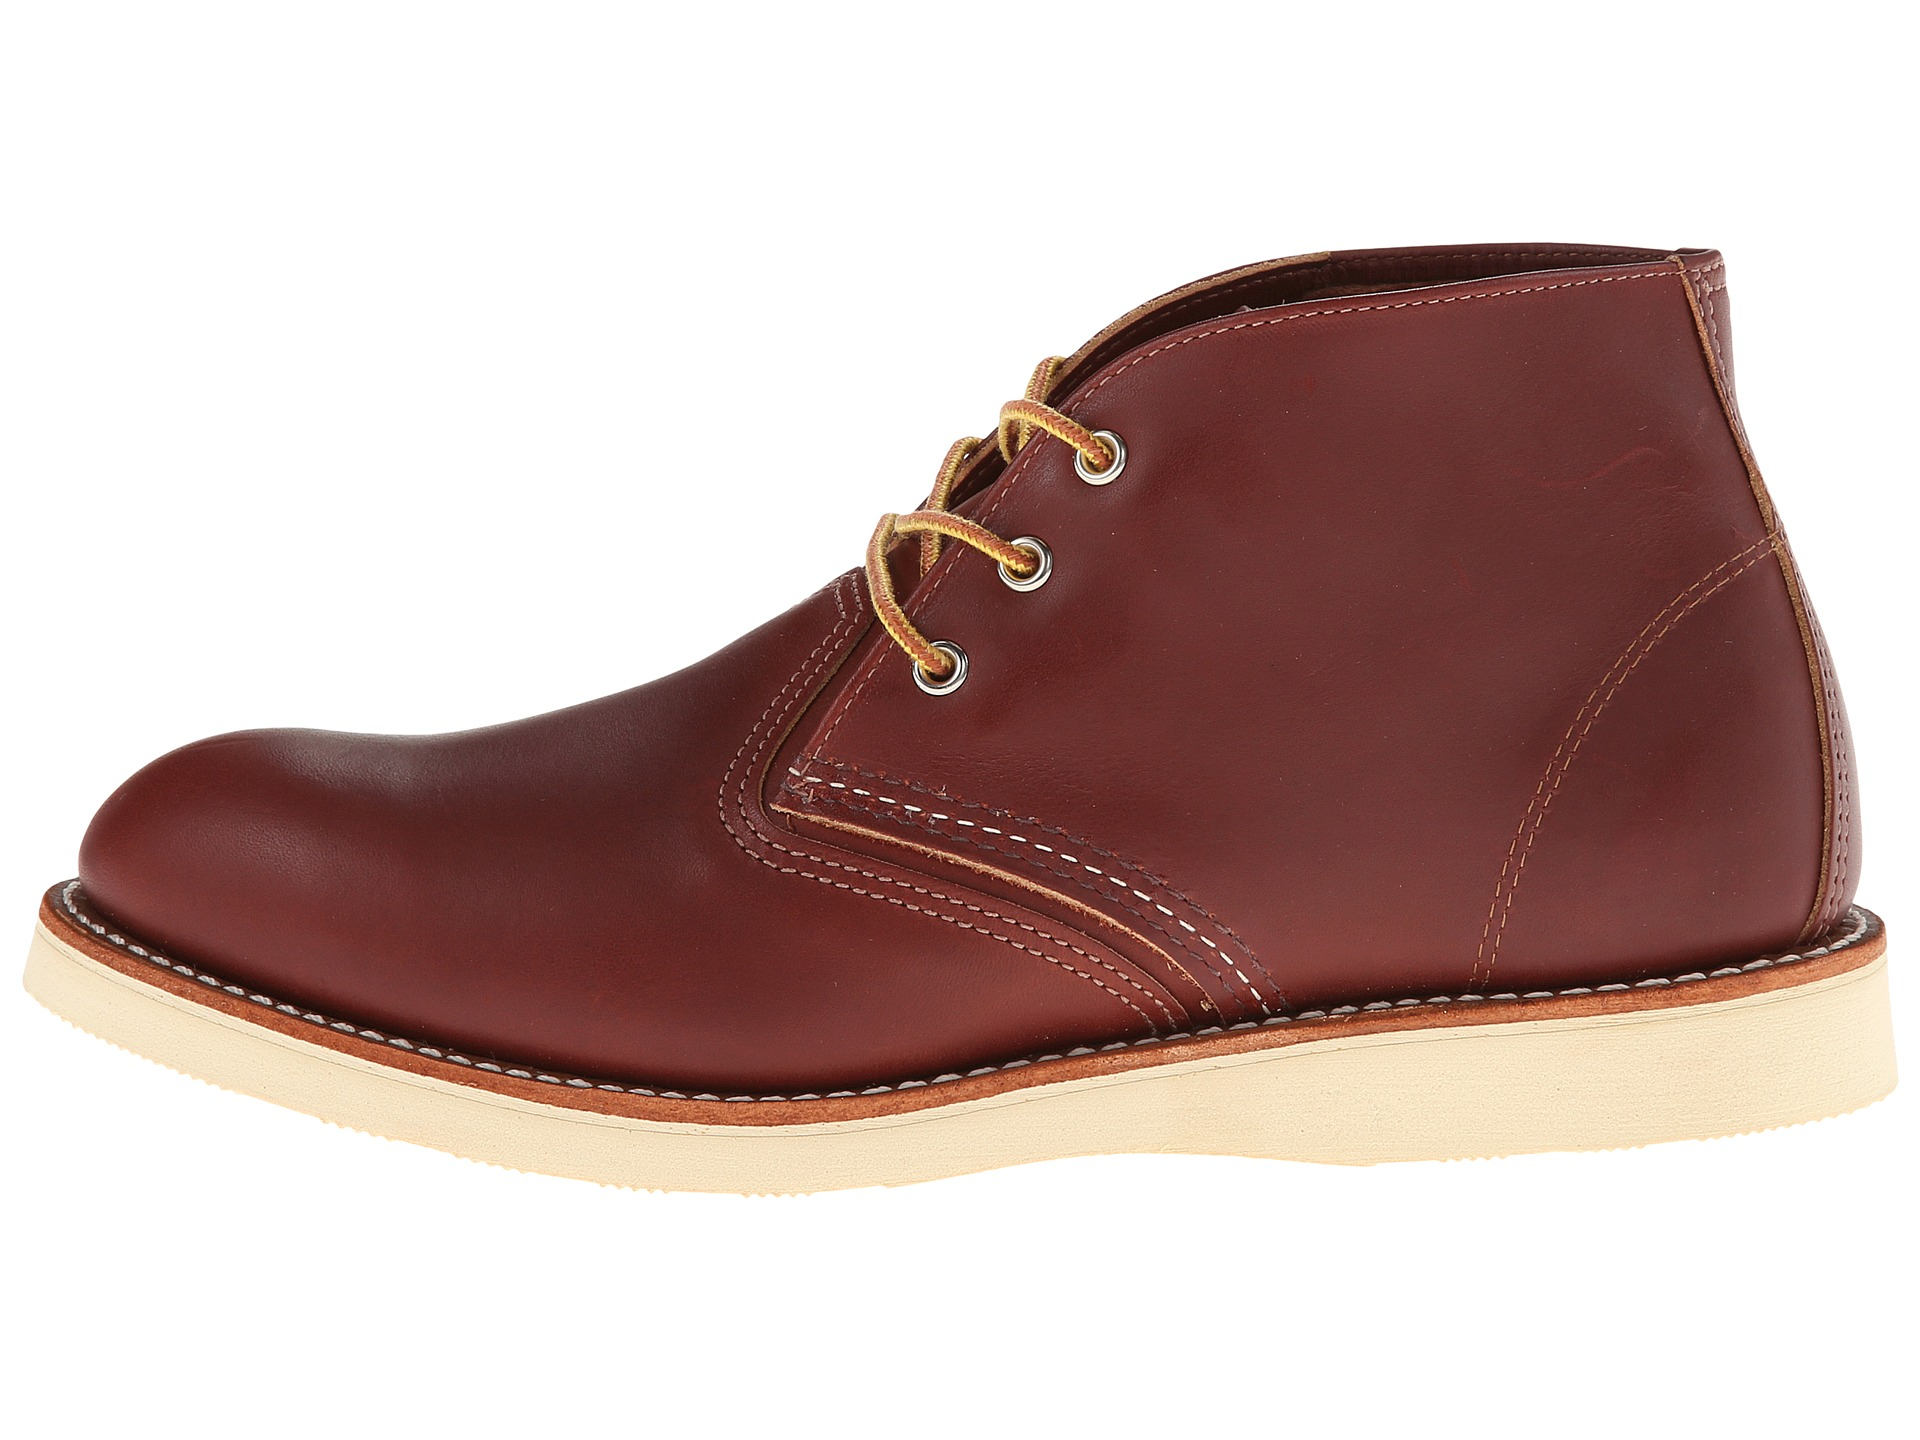 Lyst - Red Wing Work Chukka in Brown for Men